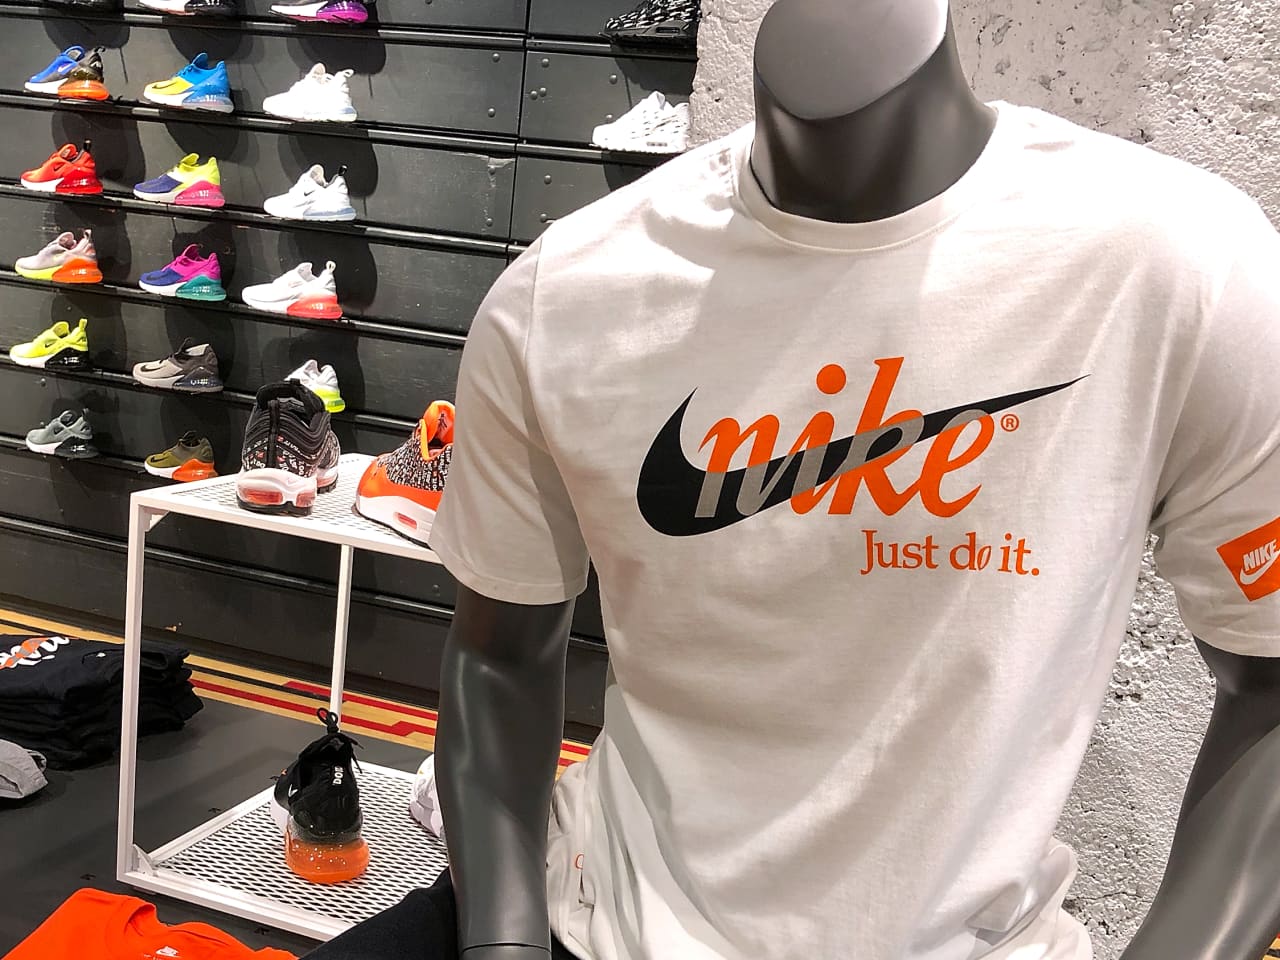 Nike manufacturing in Vietnam grinds to a halt due to creating supply chain challenge - MarketWatch